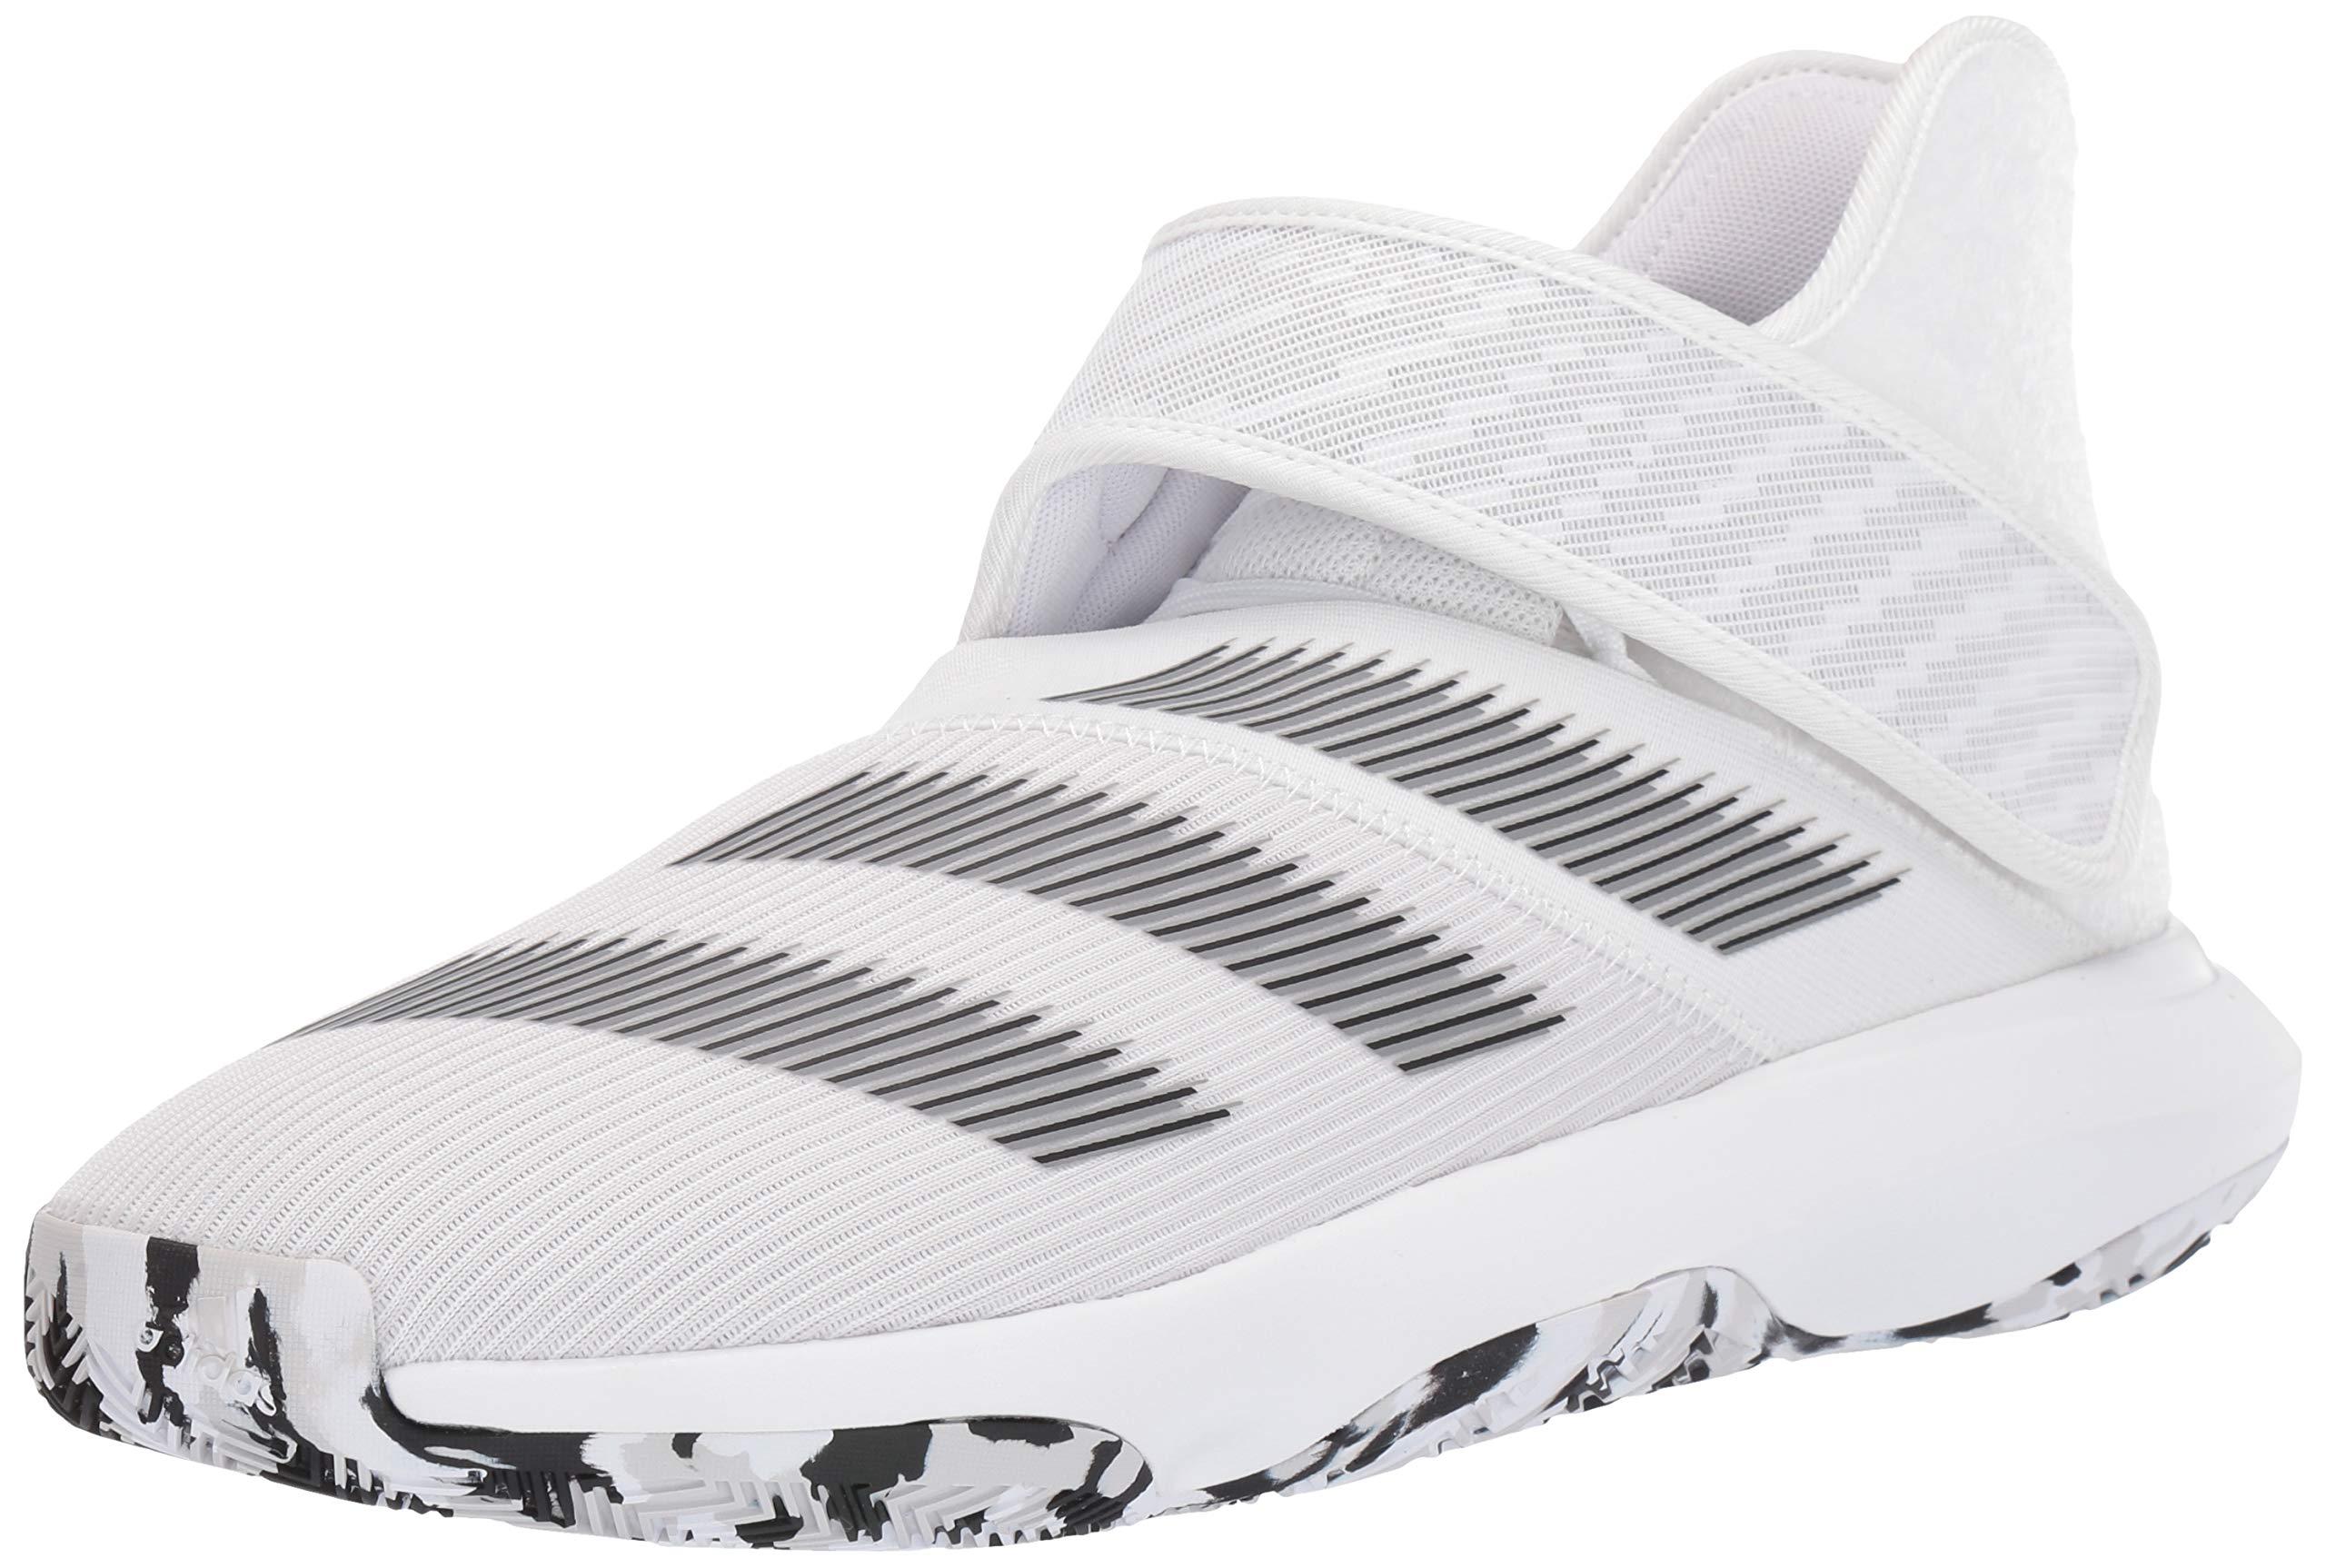 adidas Rubber Harden B/e 3 Basketball Shoes in White/Black/Grey (White) for  Men - Save 47% | Lyst